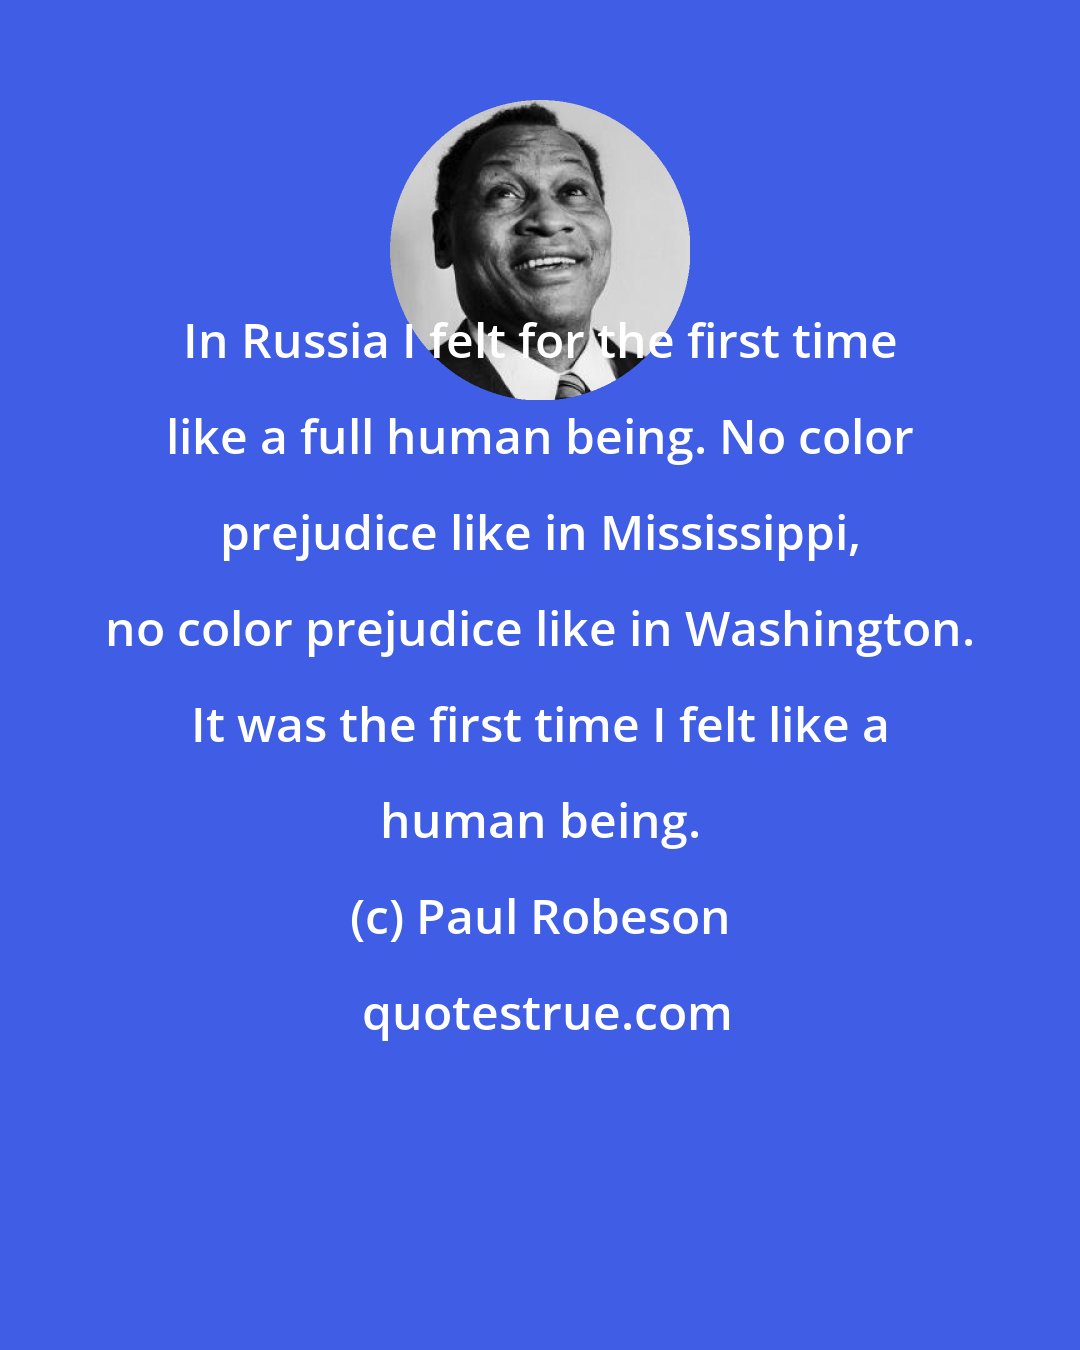 Paul Robeson: In Russia I felt for the first time like a full human being. No color prejudice like in Mississippi, no color prejudice like in Washington. It was the first time I felt like a human being.